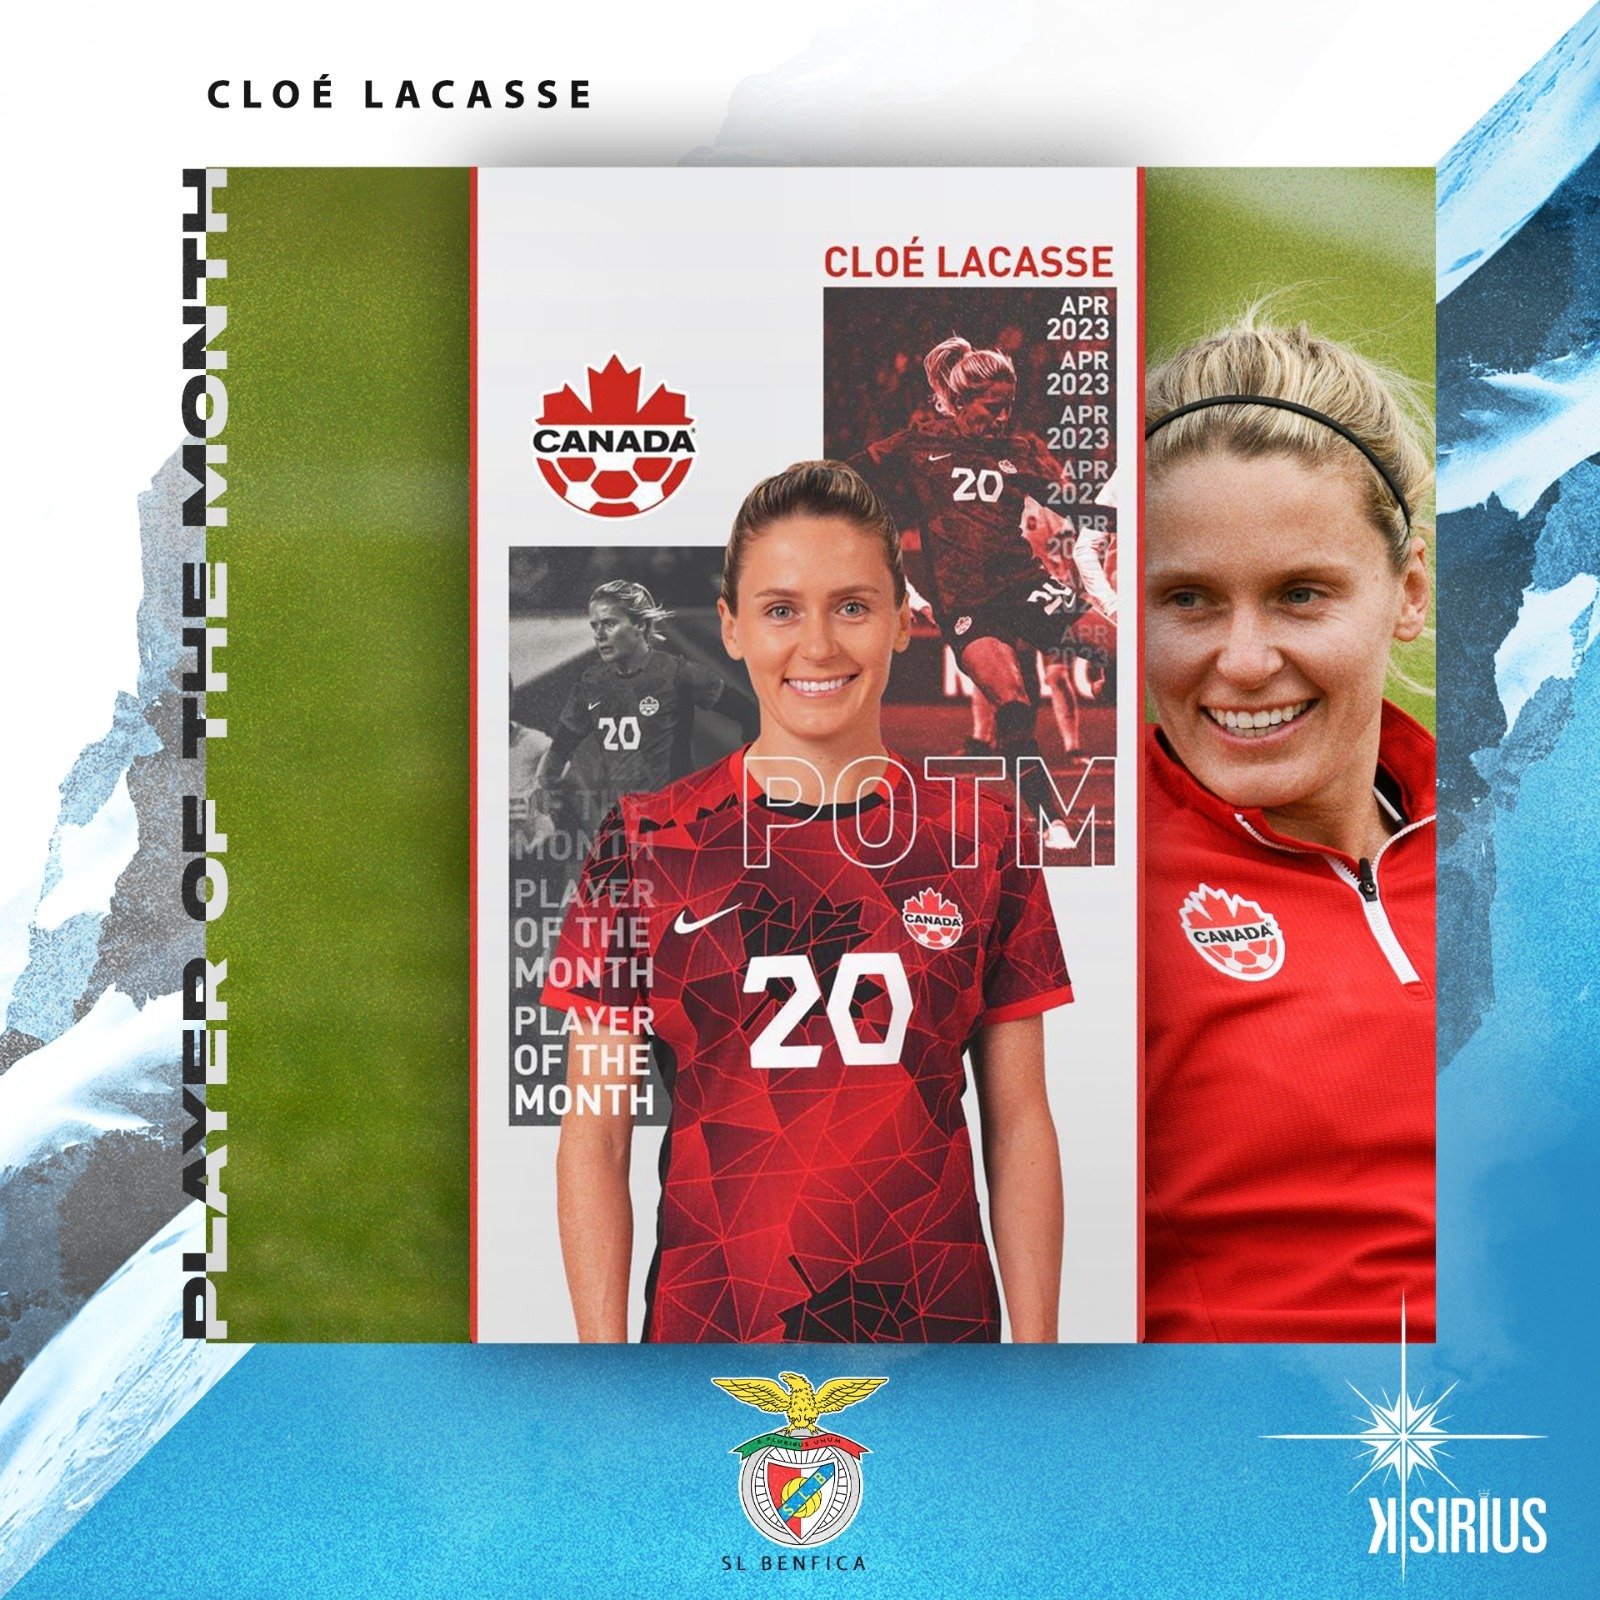 Player of the Month: Cloé Lacasse (SL Benfica)